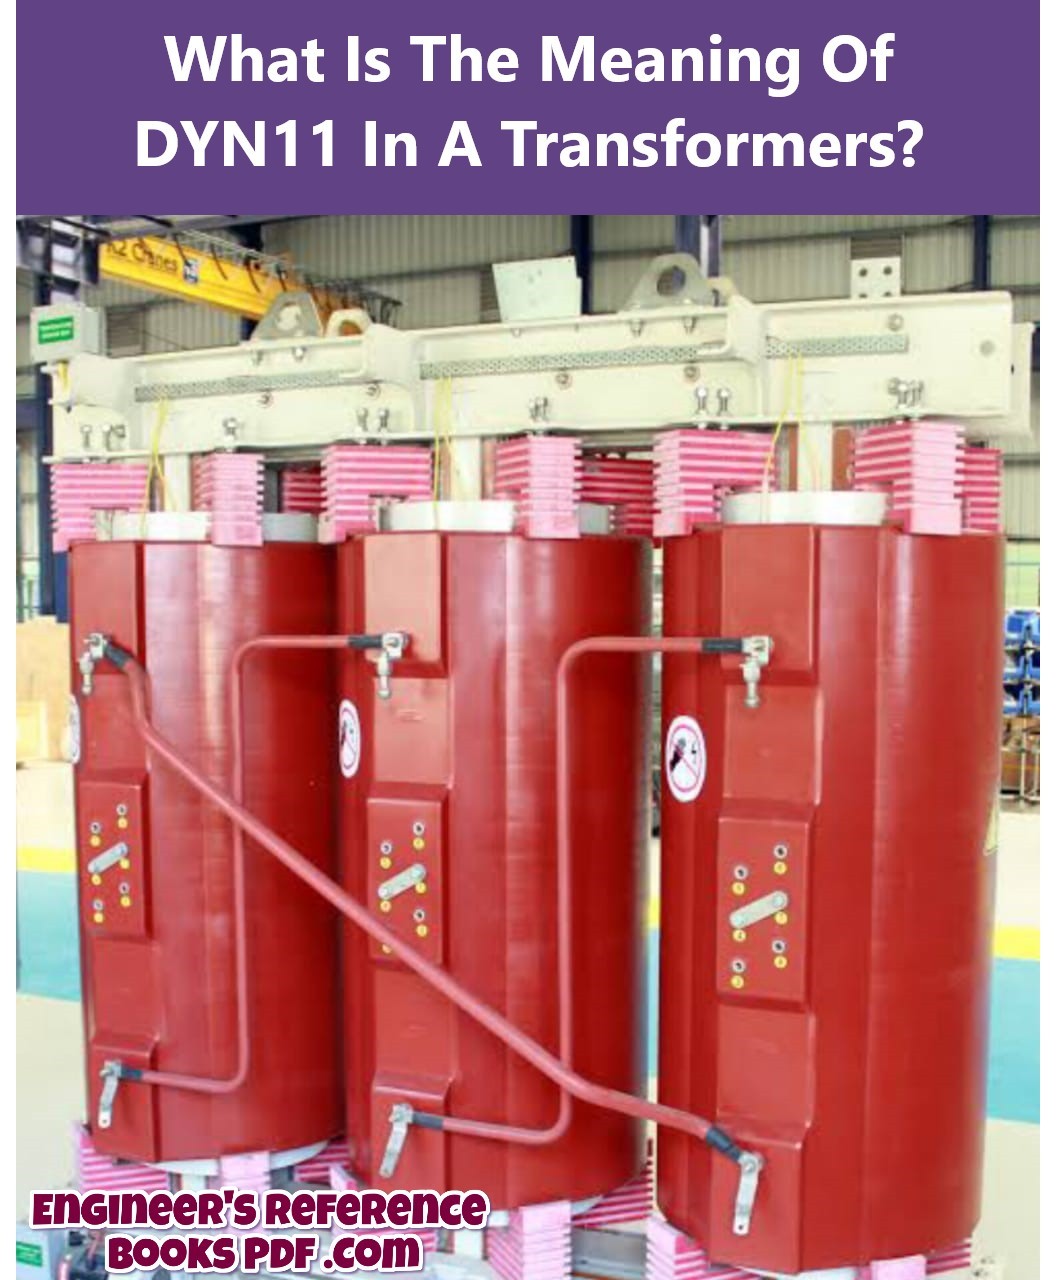 What Is The Meaning Of DYN11 In A Transformers?